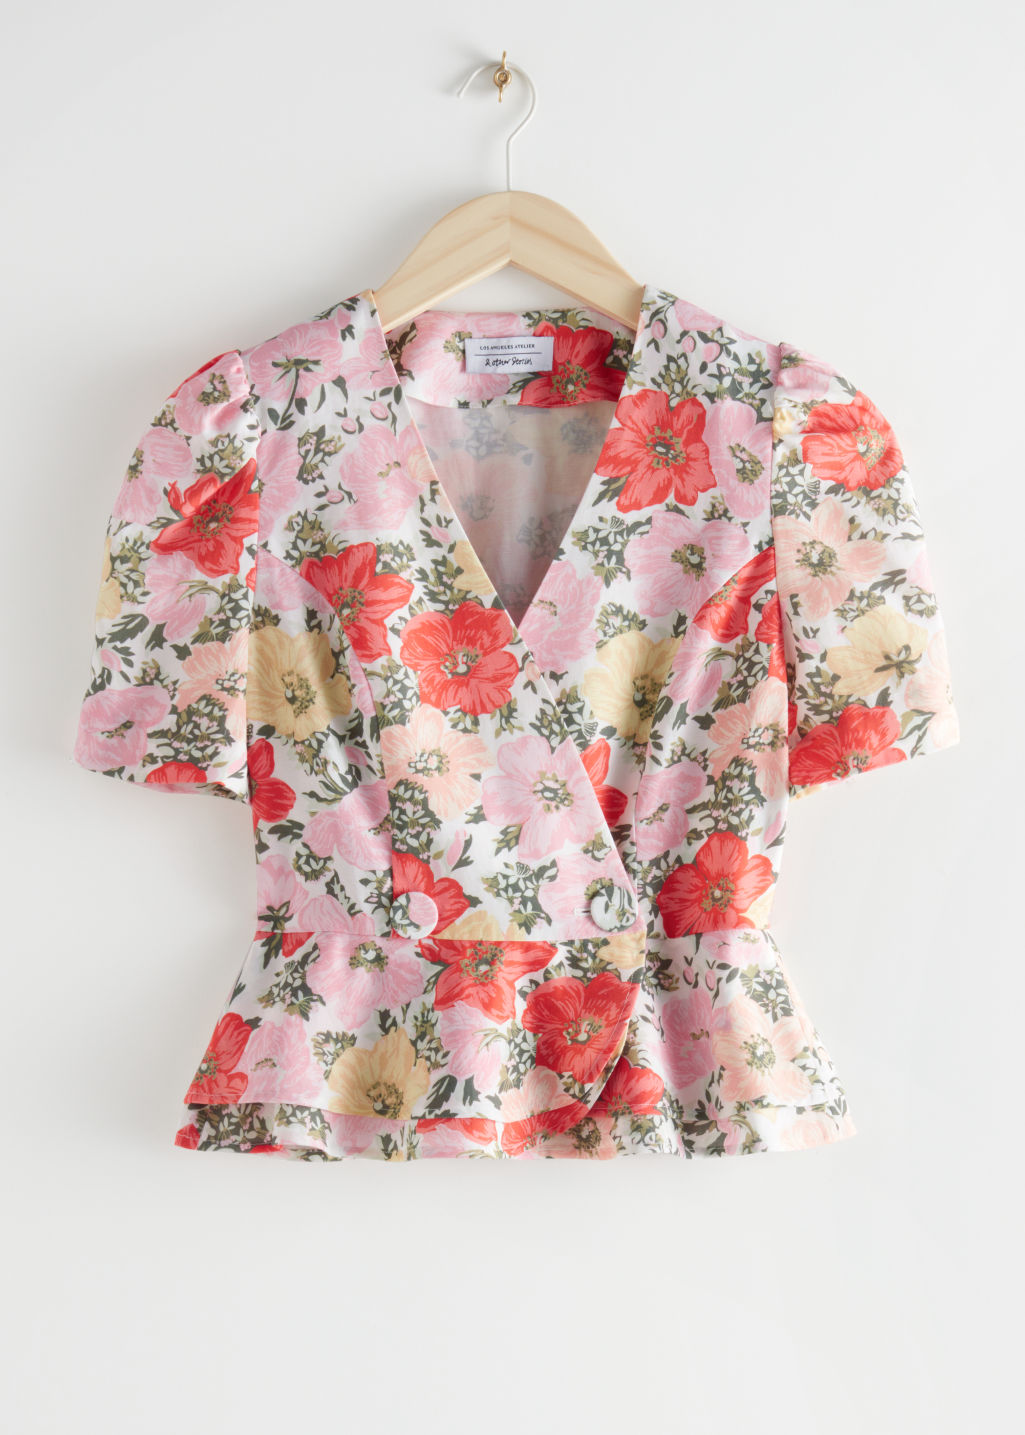 Puff Sleeve Peplum Top - Floral Print - Tops & T-shirts - & Other Stories